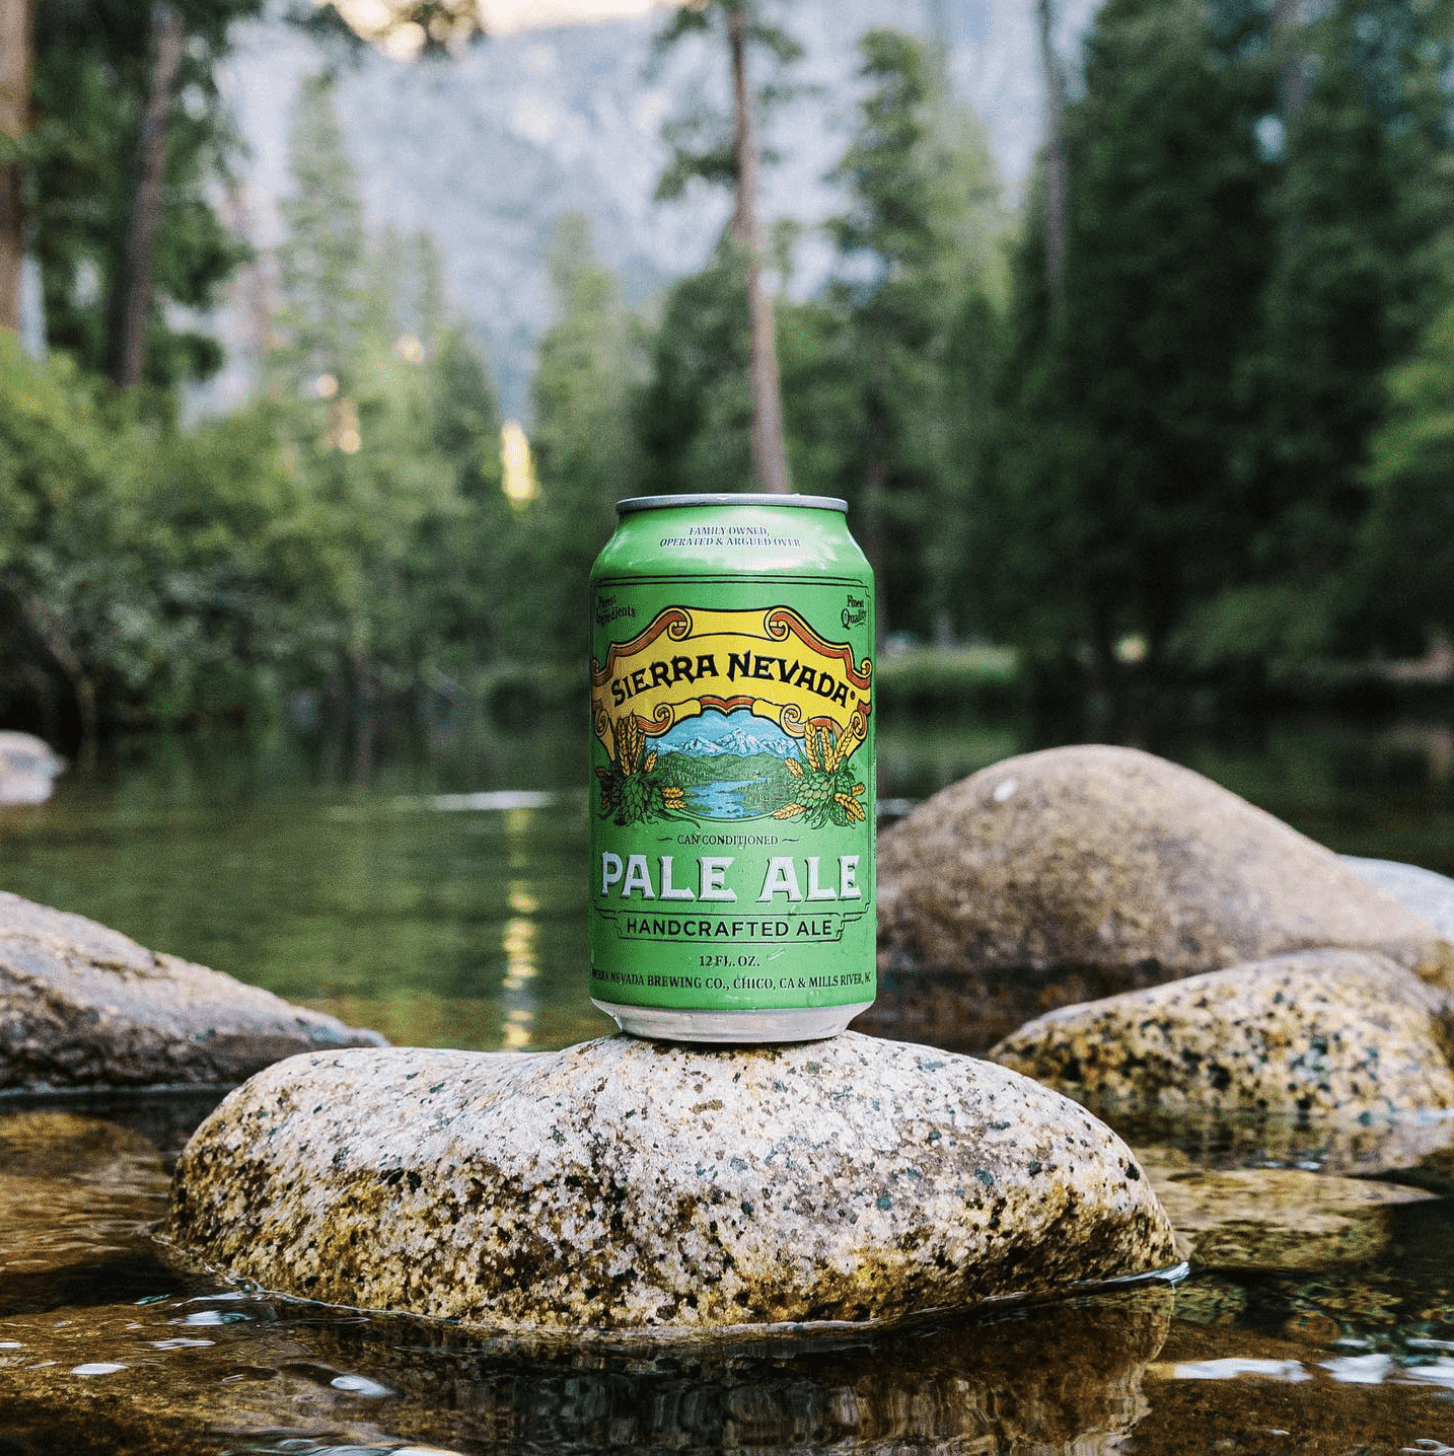 Pale Ale beer can in mountain lake scene